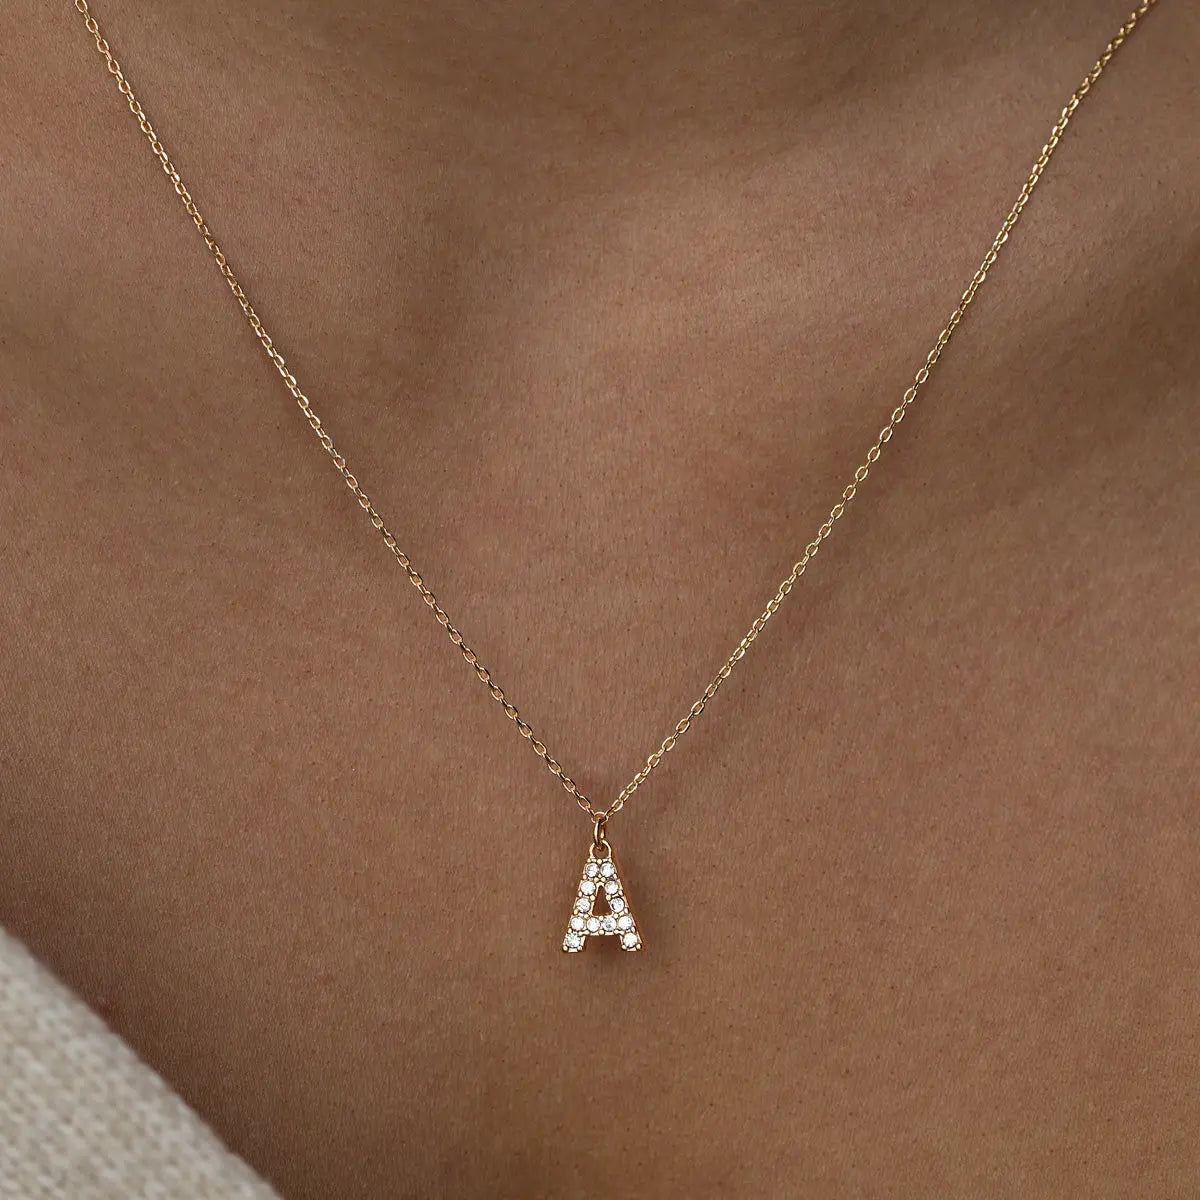 Crystal letter necklace A